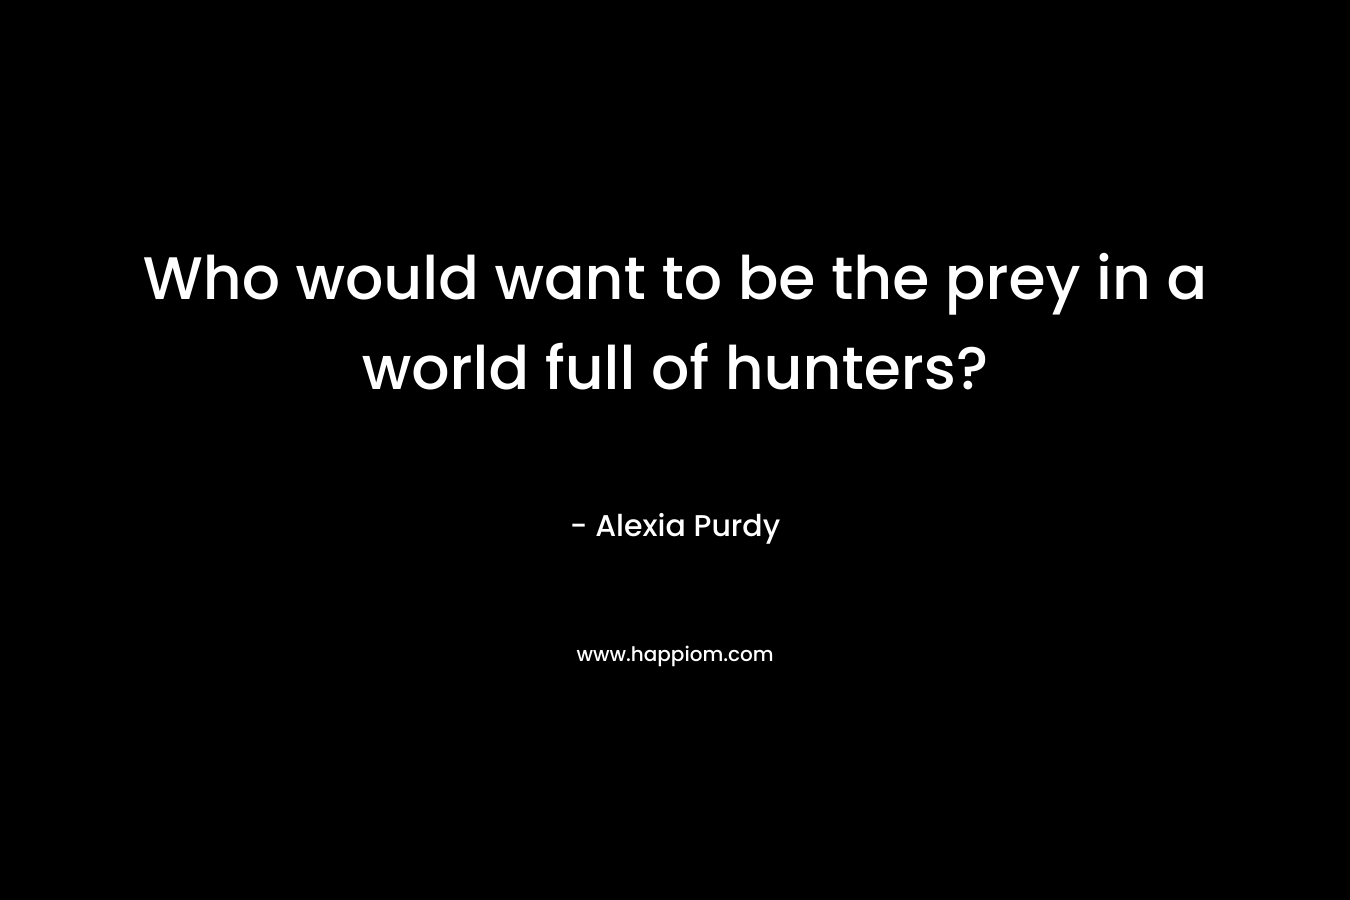 Who would want to be the prey in a world full of hunters? – Alexia Purdy